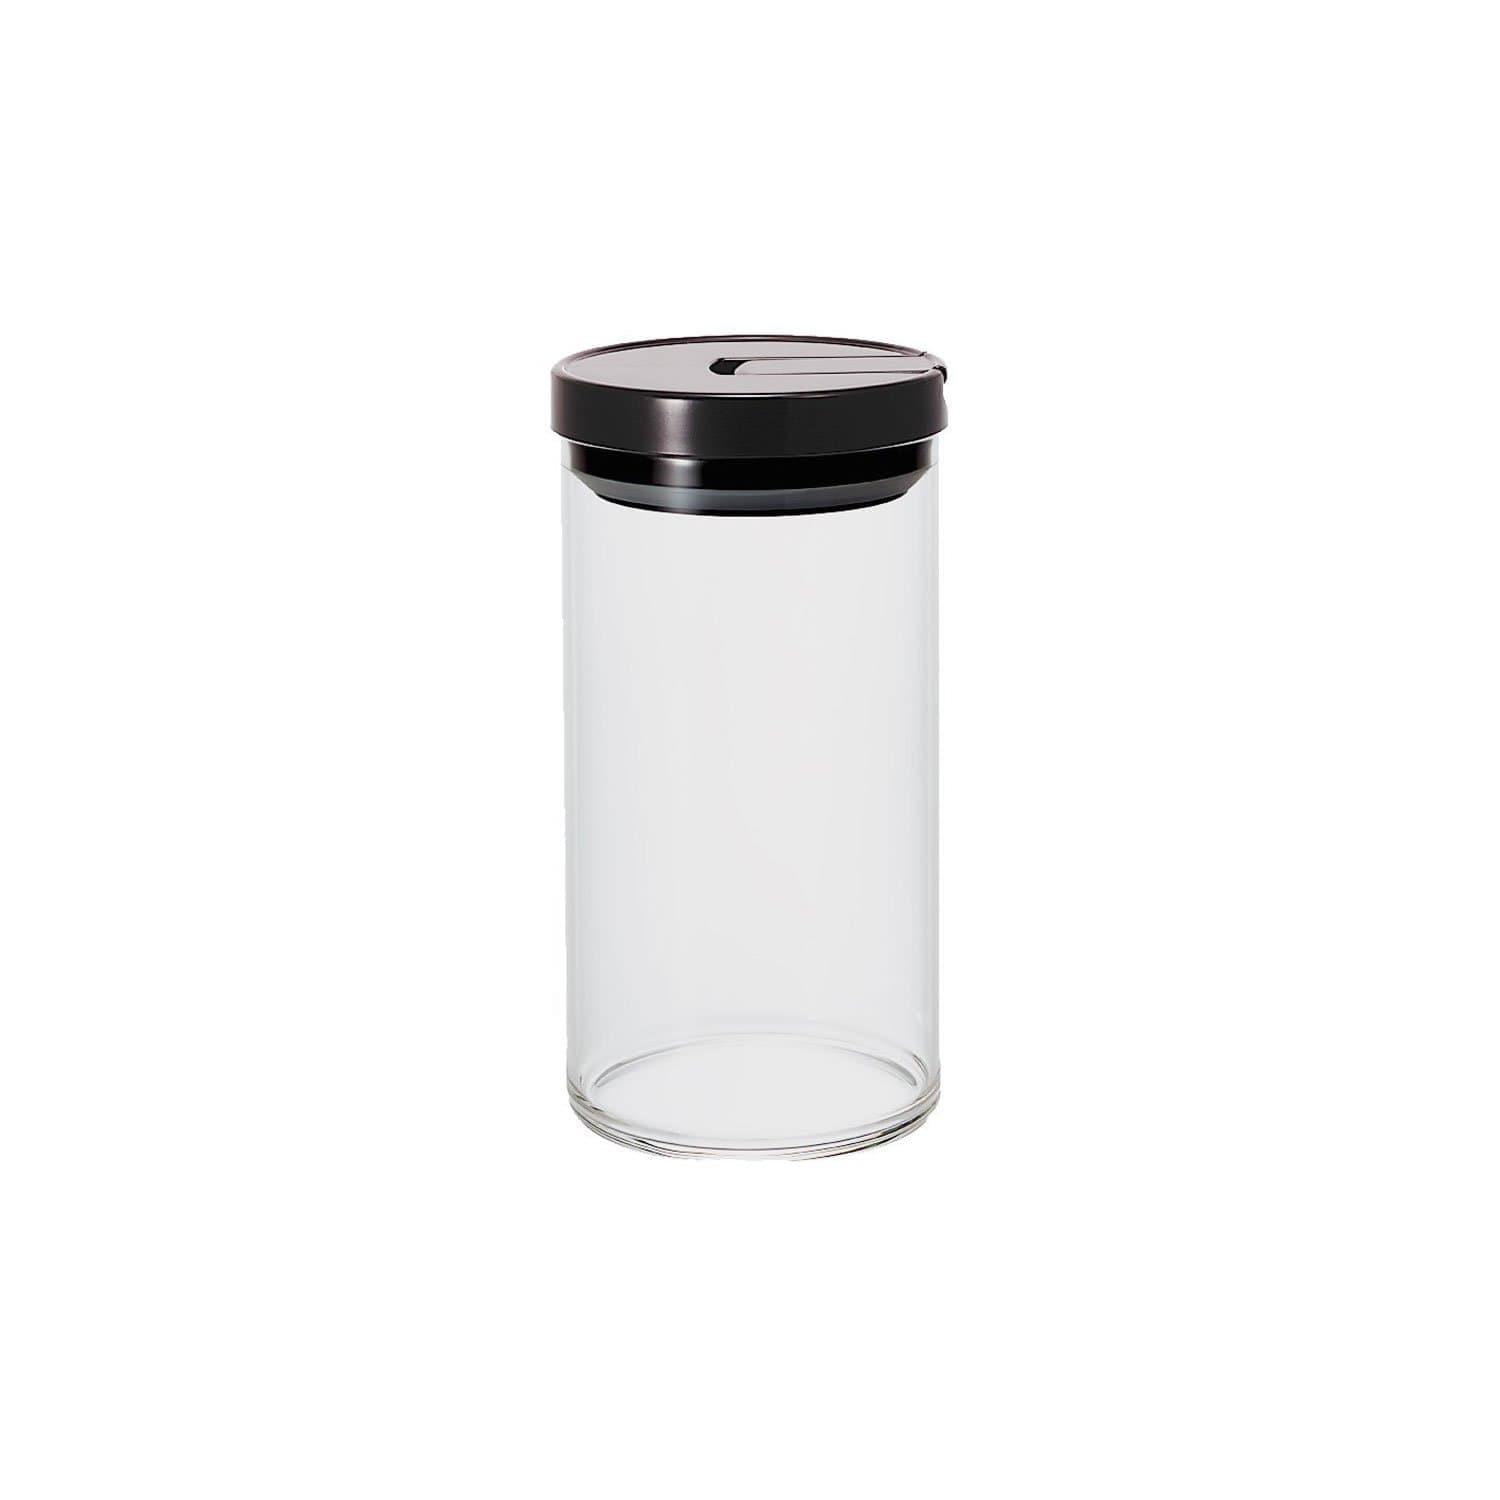 HARIO - COFFEE CANISTER LARGE BLACK - MCN-300B